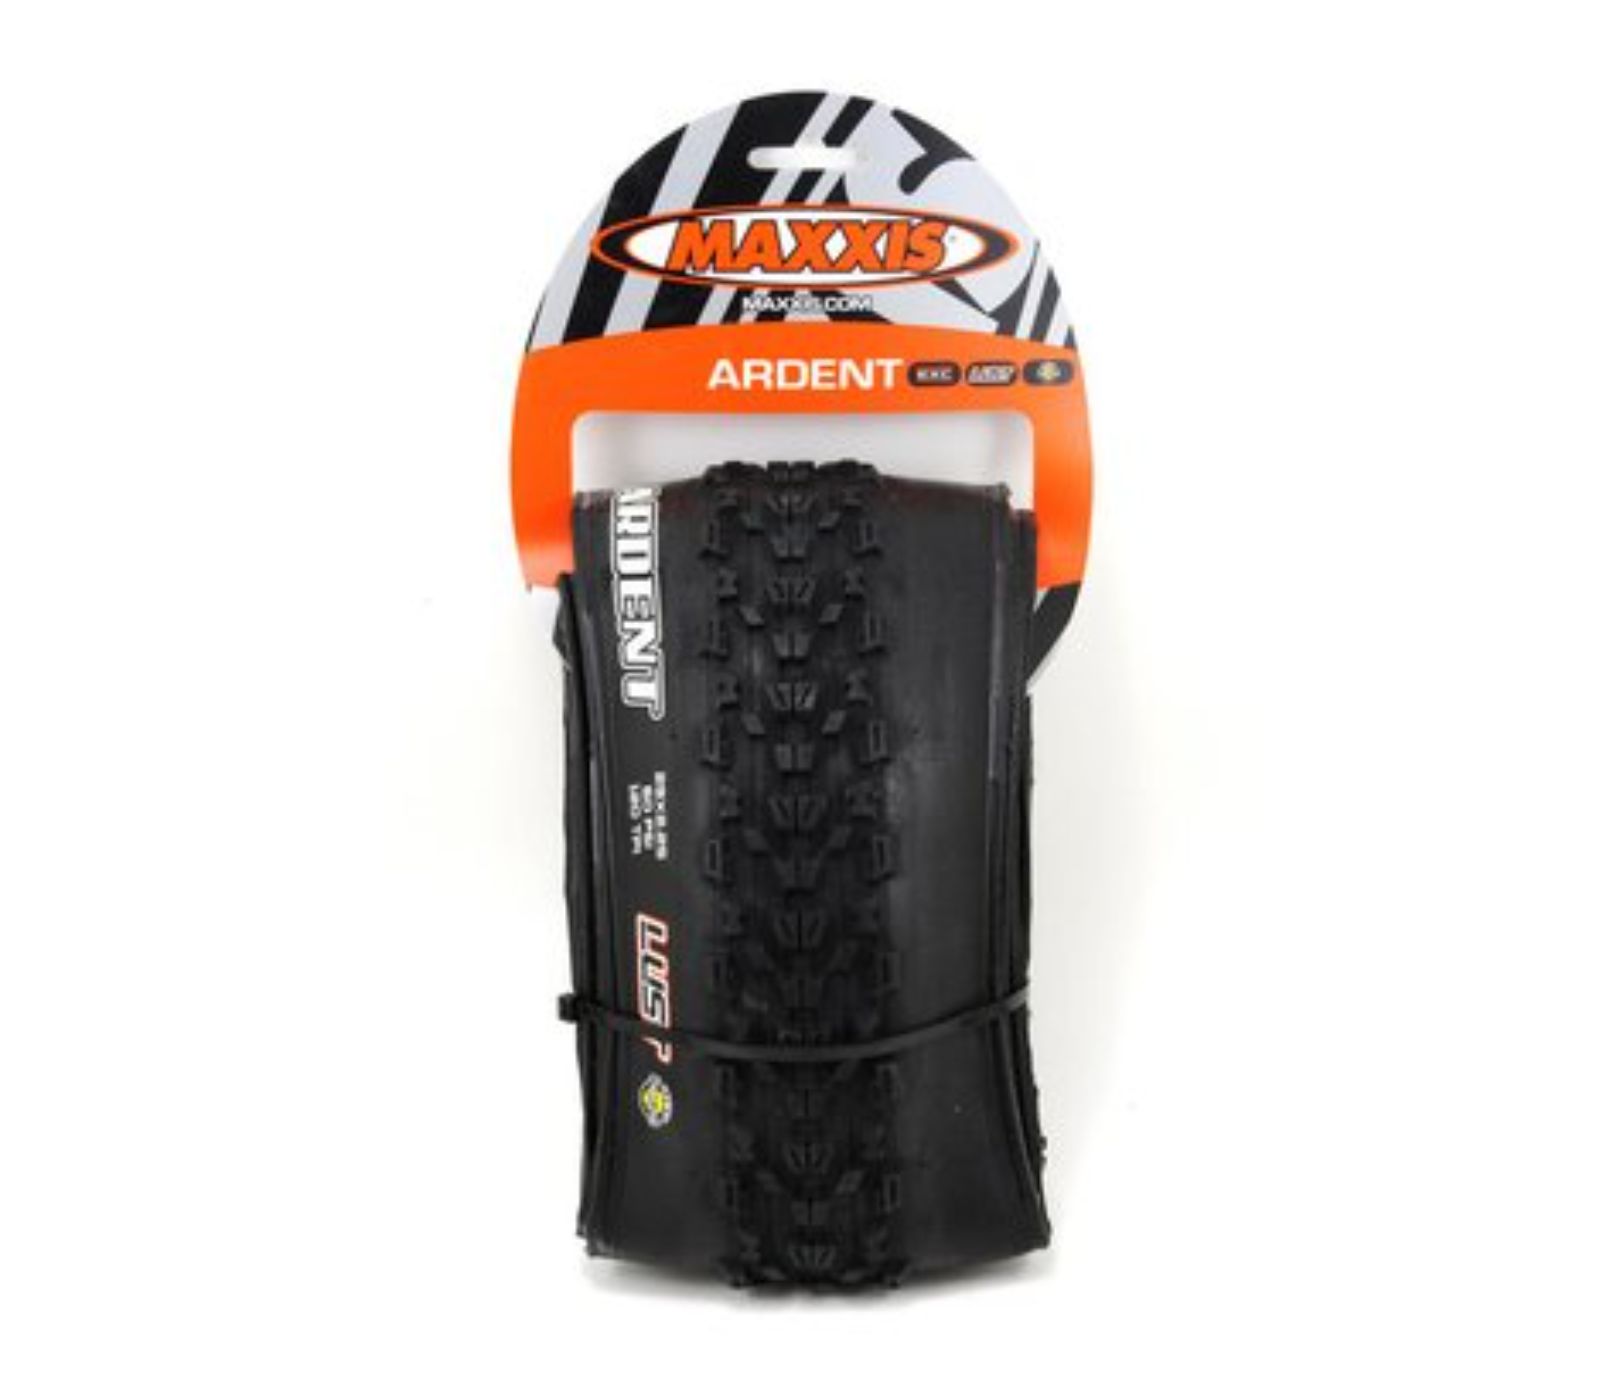 Maxxis Ardent 29x2.25 UST LUST Tubeless MTB Tyre